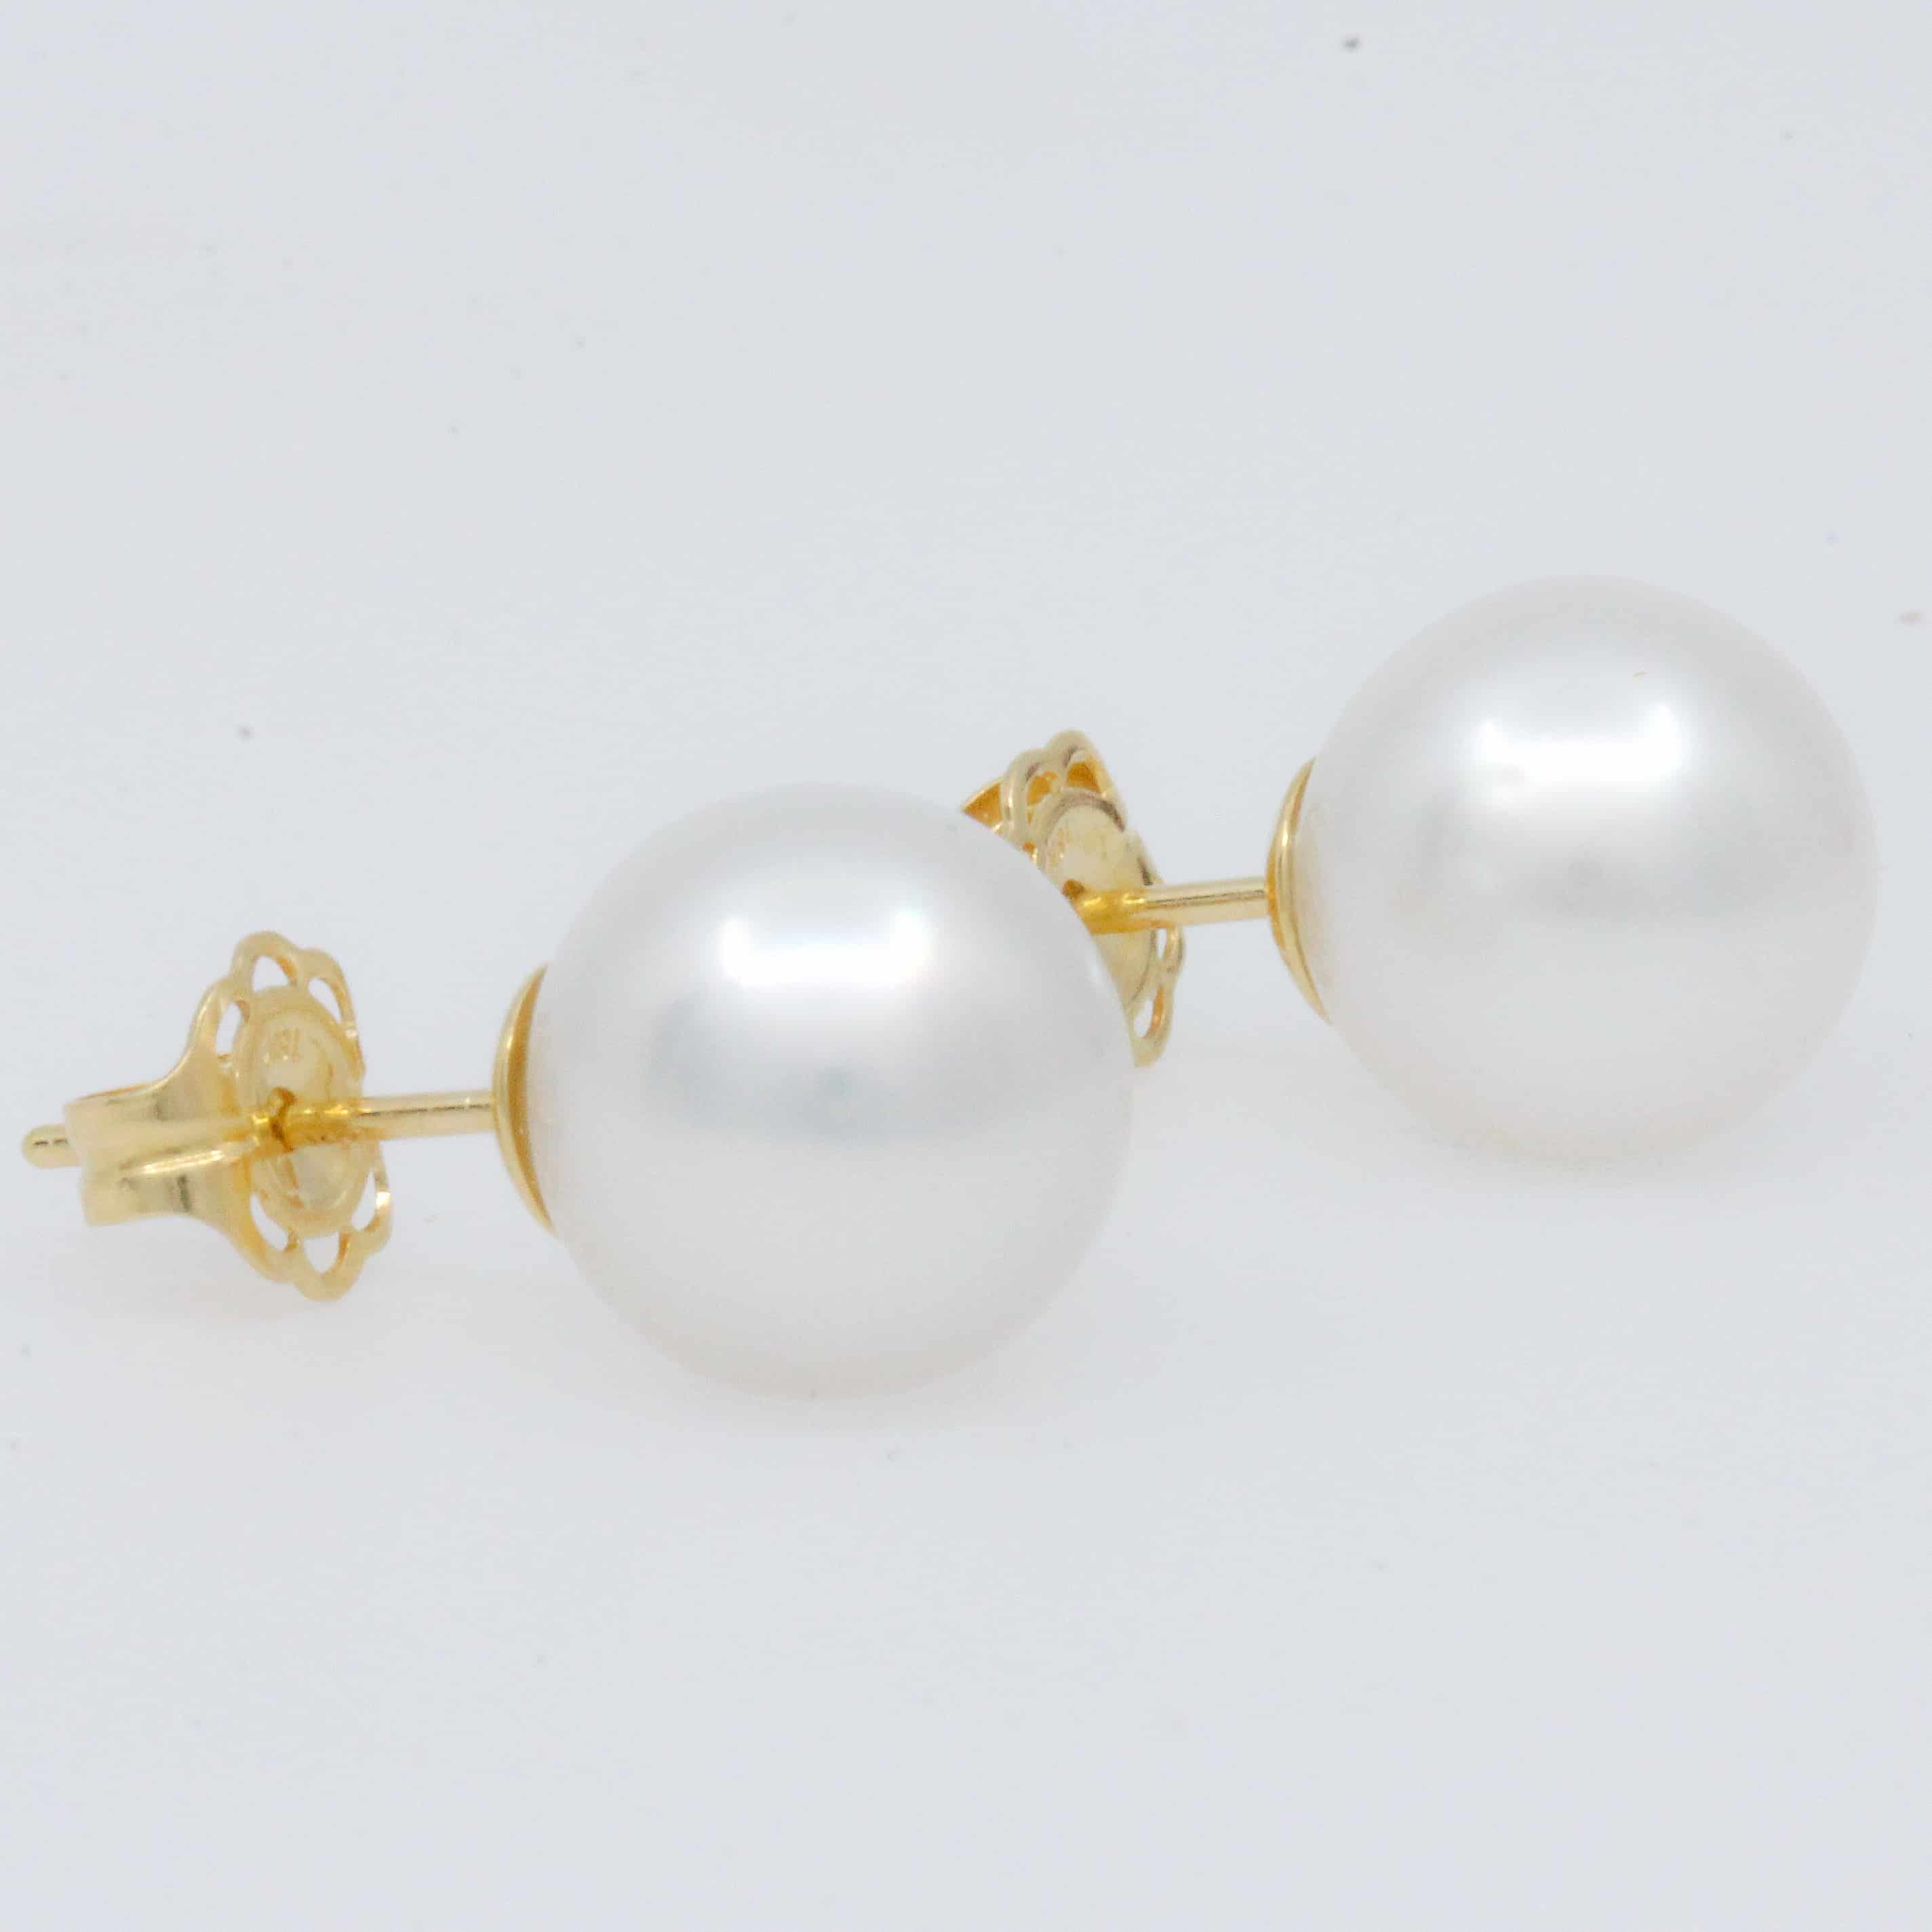 Little Bow Earrings Gold & Pearl – M Donohue Collection